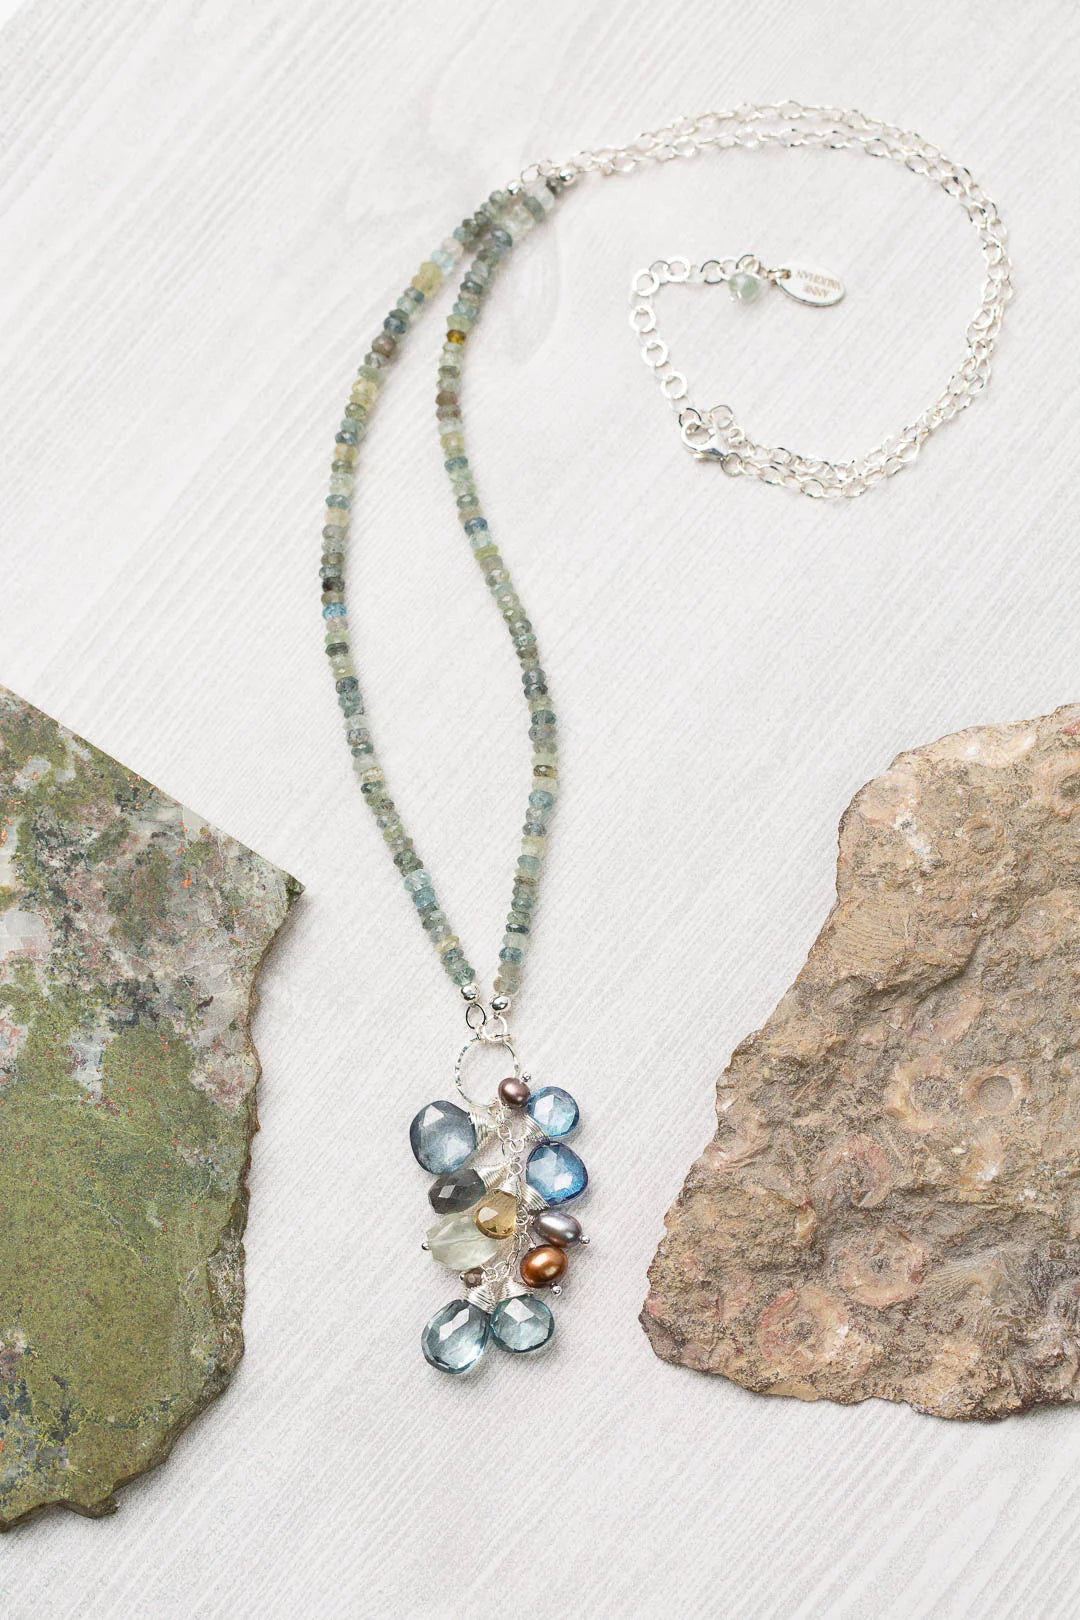 Vaughan - Resilience Collection - Necklace - Aquamarine/Topaz/Pearl Briolette Focal Cluster #Resil003N